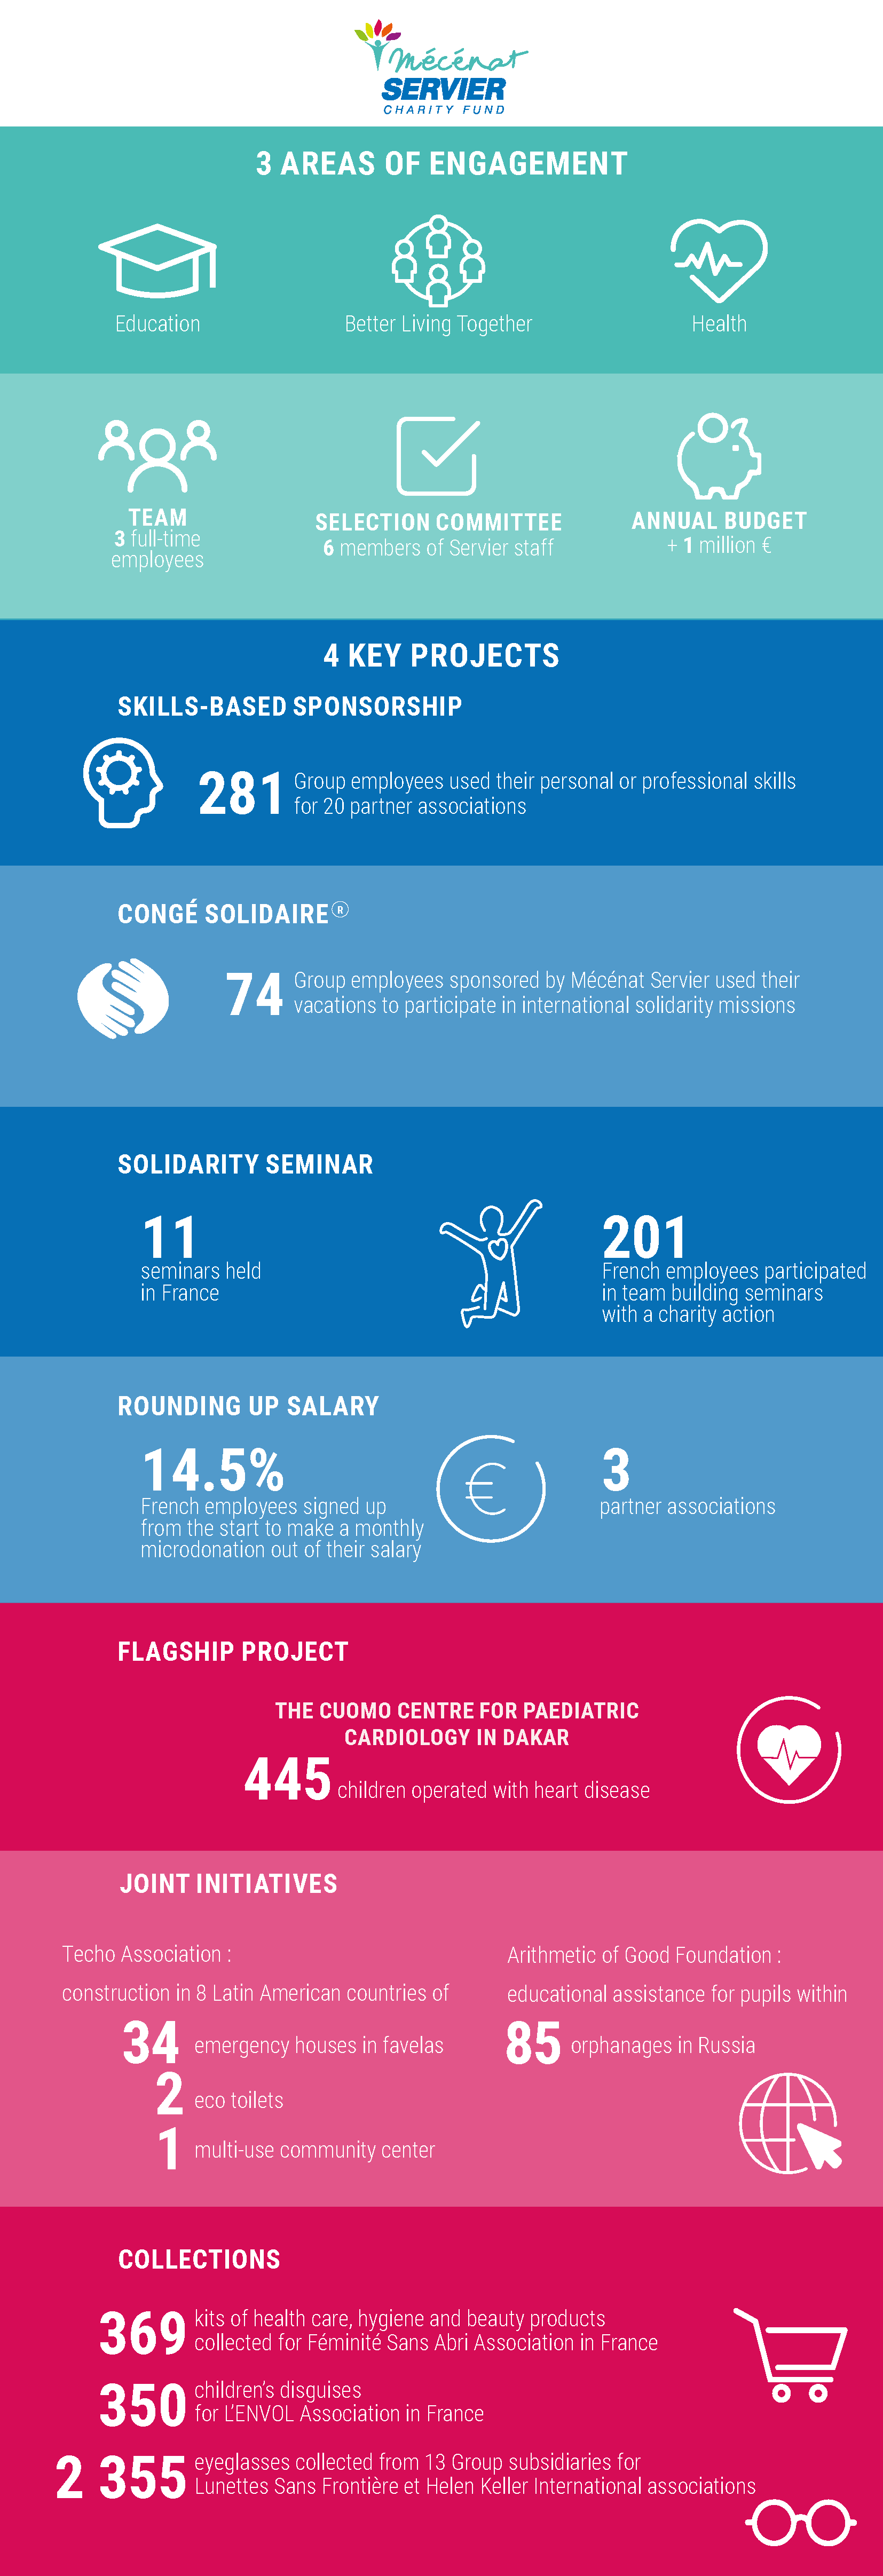 Infogrpahics on the 3 years of Servier Mécénat